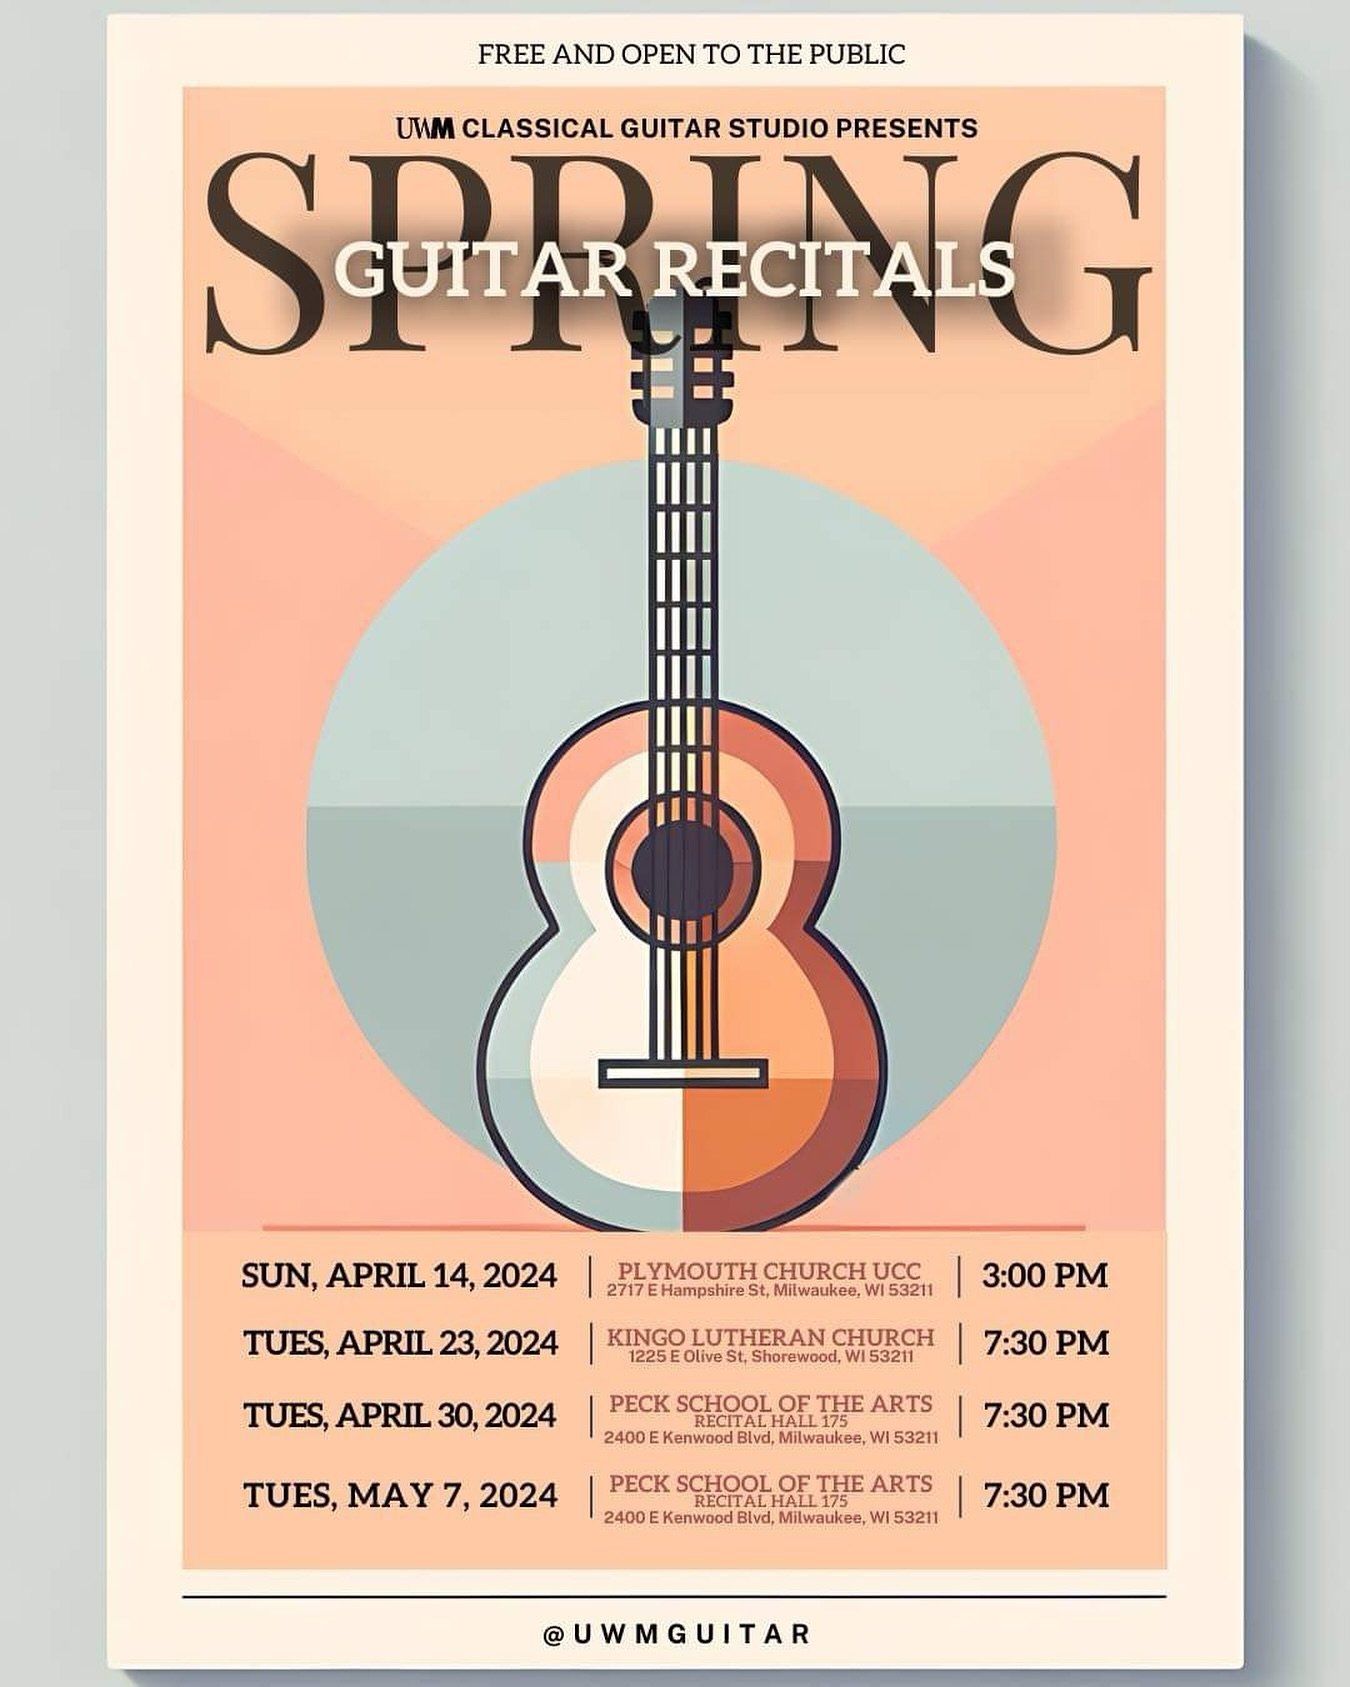 Our end-of-semester studio concert series is starting soon &mdash; we hope you&rsquo;ll come check out what everyone&rsquo;s been working on this semester! 🎶

🖼️: @kyle.khembo 

-

@uwmilwaukee @uwmpsoa #music #musician #classicalmusic #guitar #cla